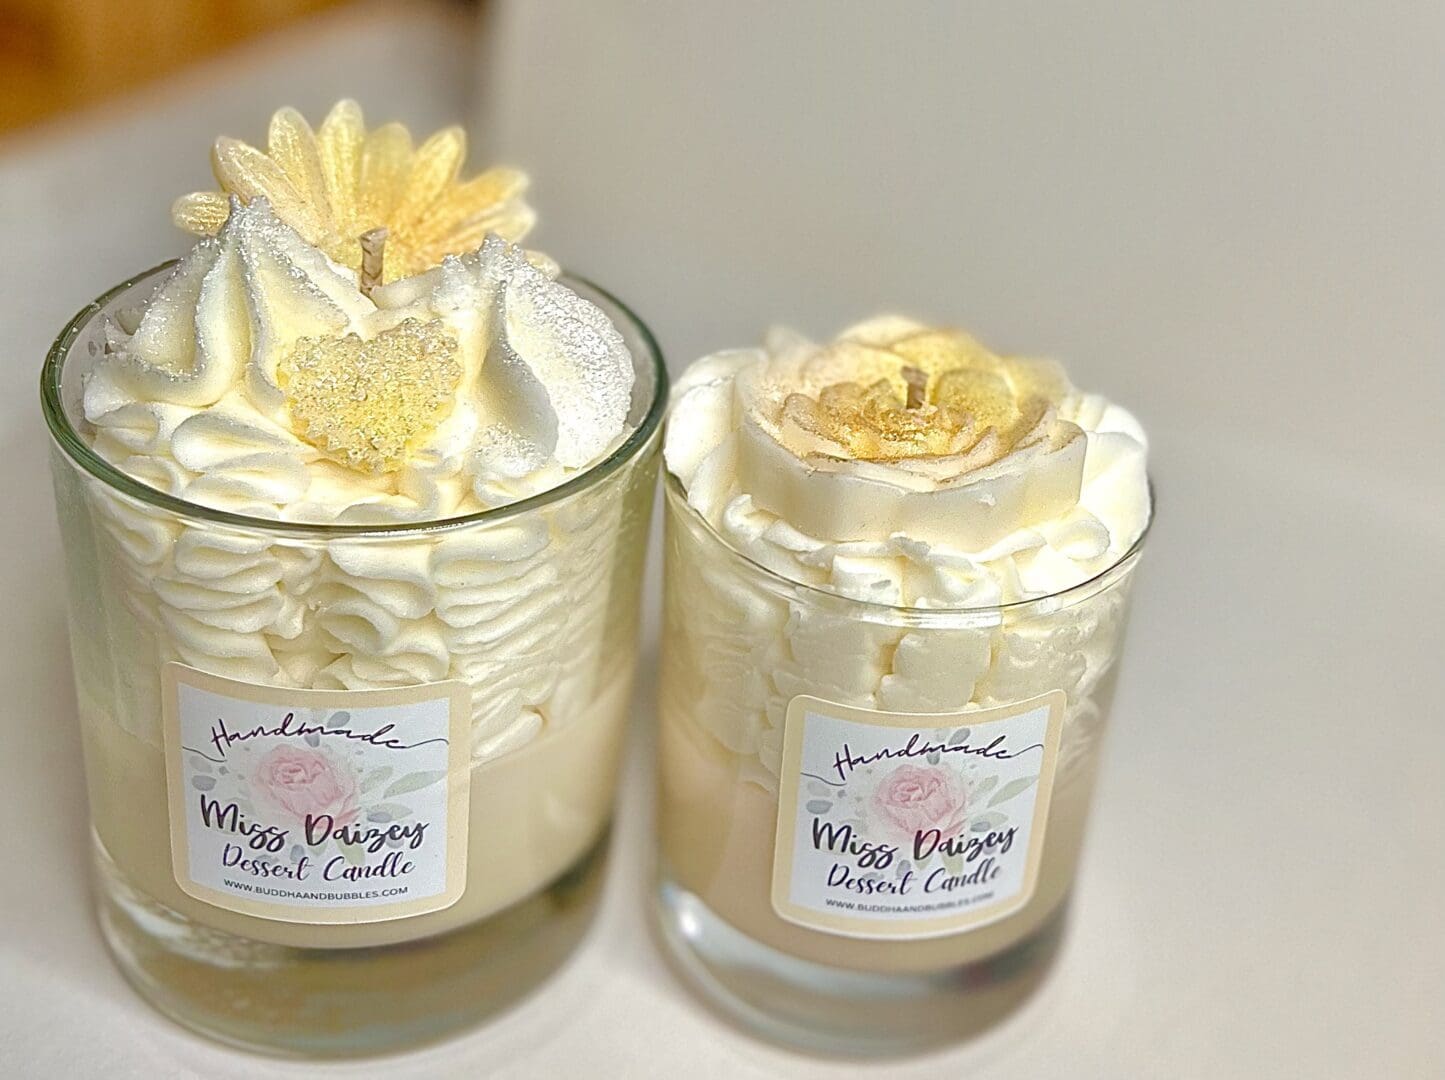 Whipped Wax Dessert Candle Handmade in the UK